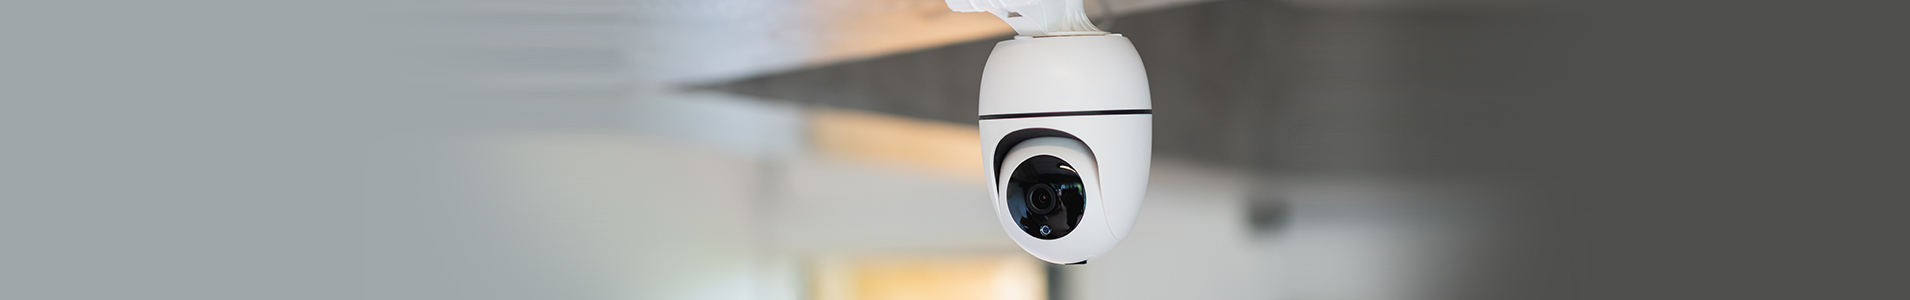 State-of-the-Art CCTV Security Cameras by Securitec Security